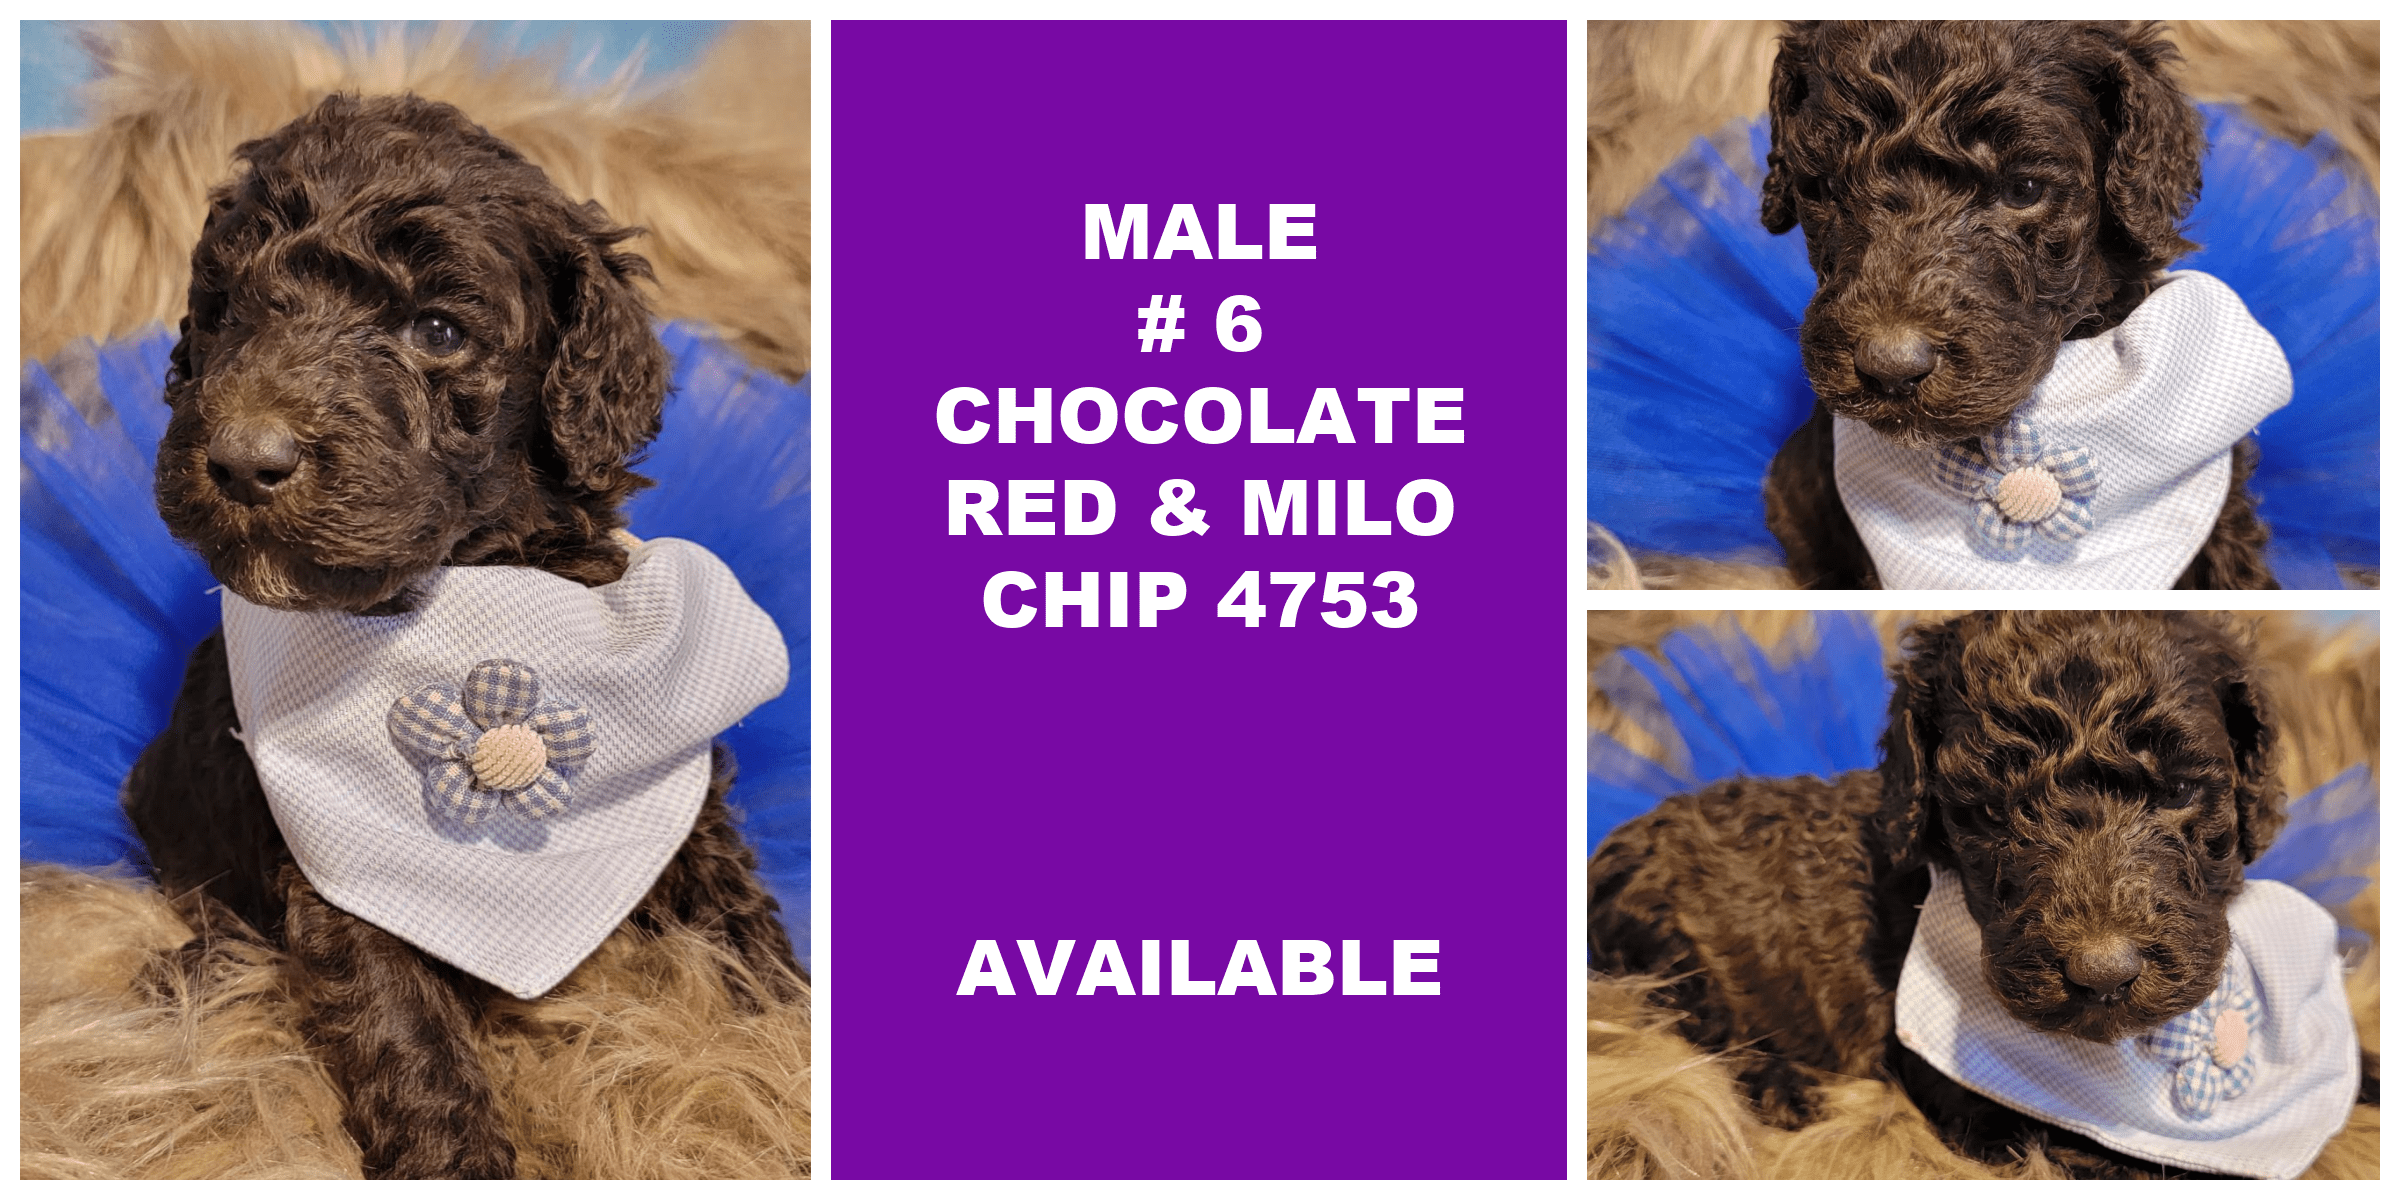 MALE 6 CHOCOLATE RED MILO CHIP 4753 AVAILABLE